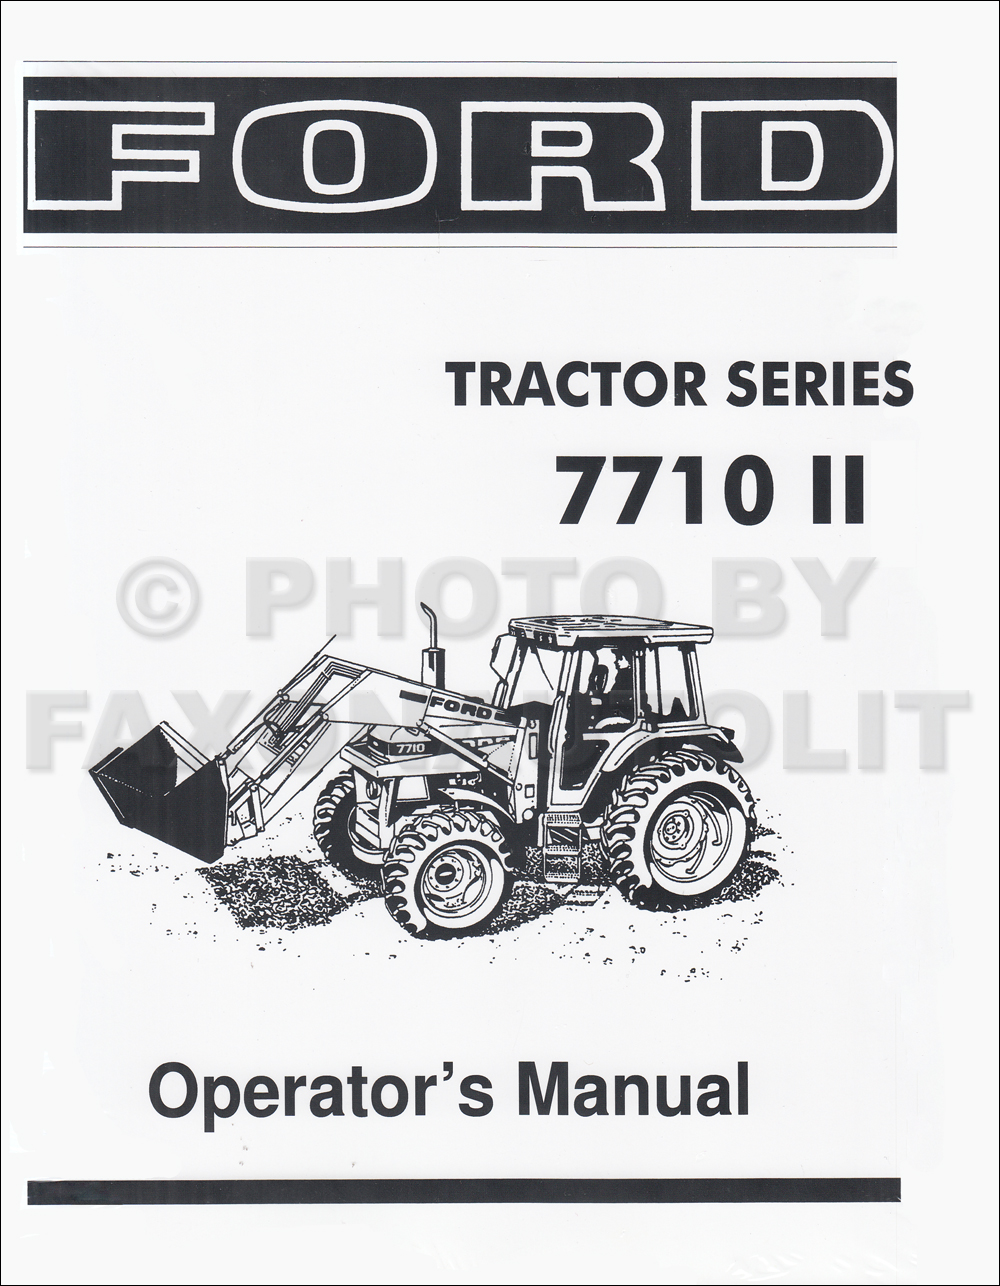 1985-1991 Ford 7710 II Tractor Owner's Manual Reprint